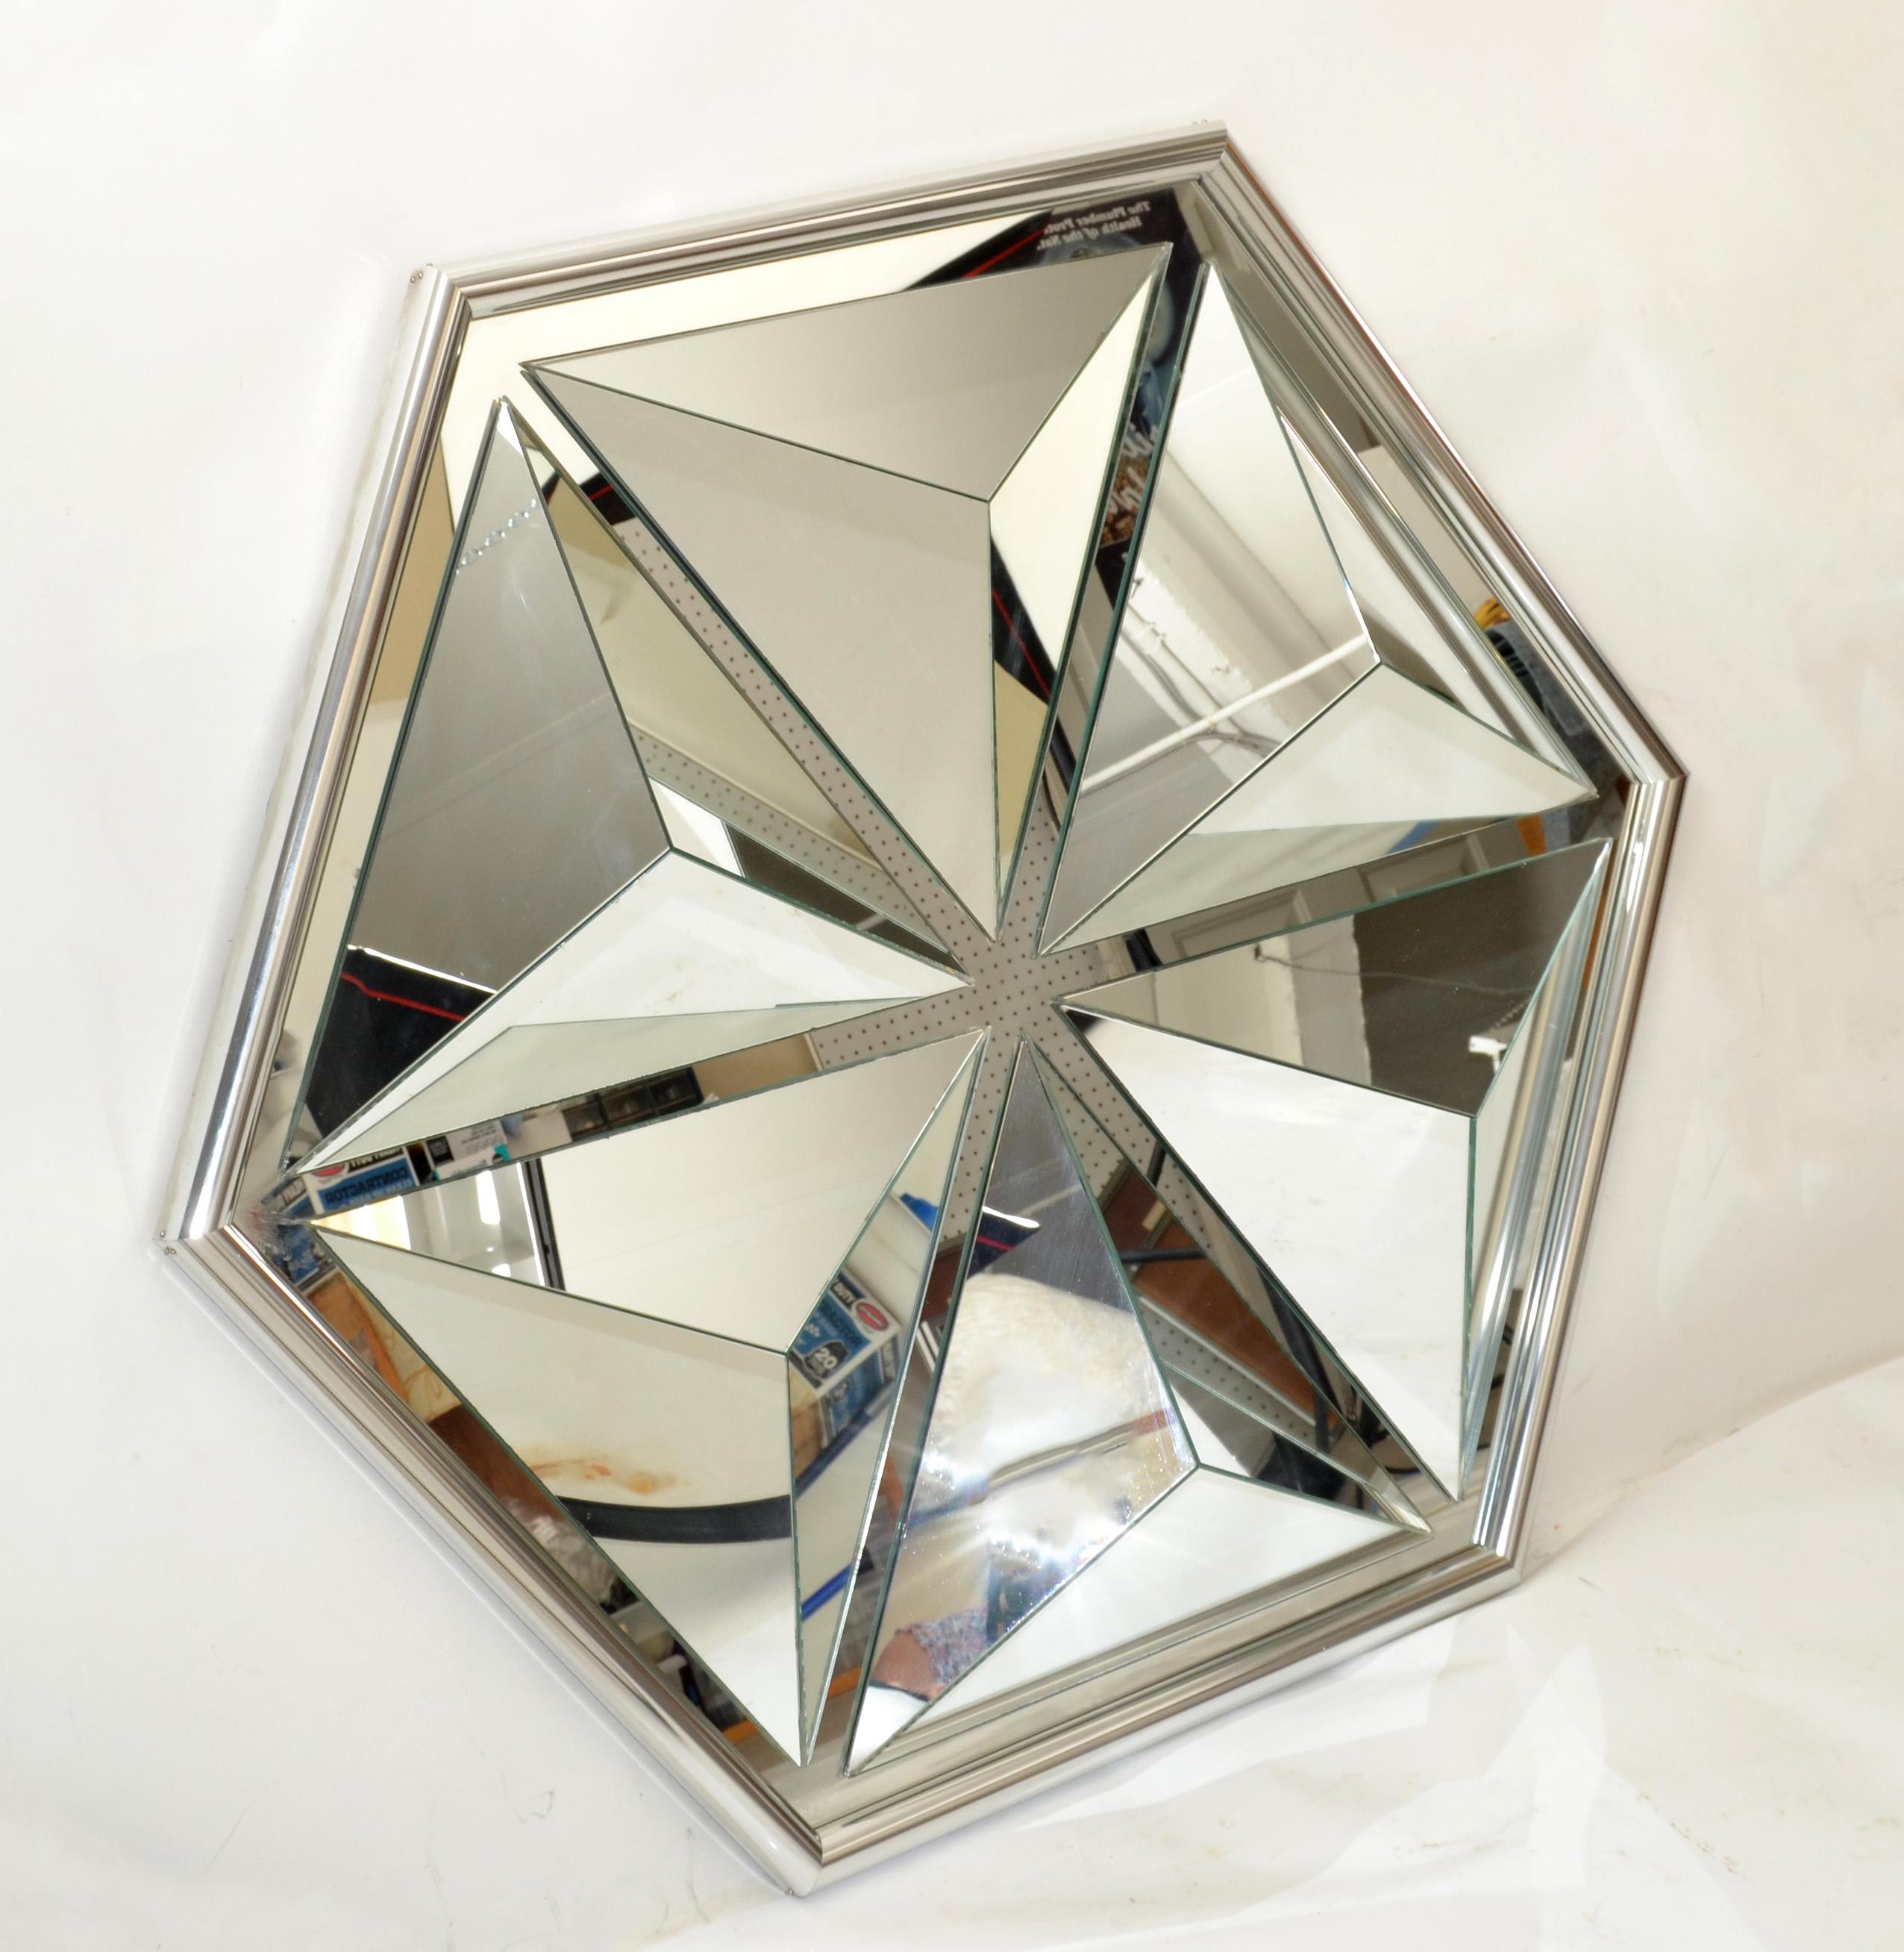 One-of-a-kind diamond shaped faceted wall mirror made in the USA in the 1976.
Hand painted silver finish frame.
Mid-Century Modern design for any interior.
Secure hanging construction and supported by the wood backboard.